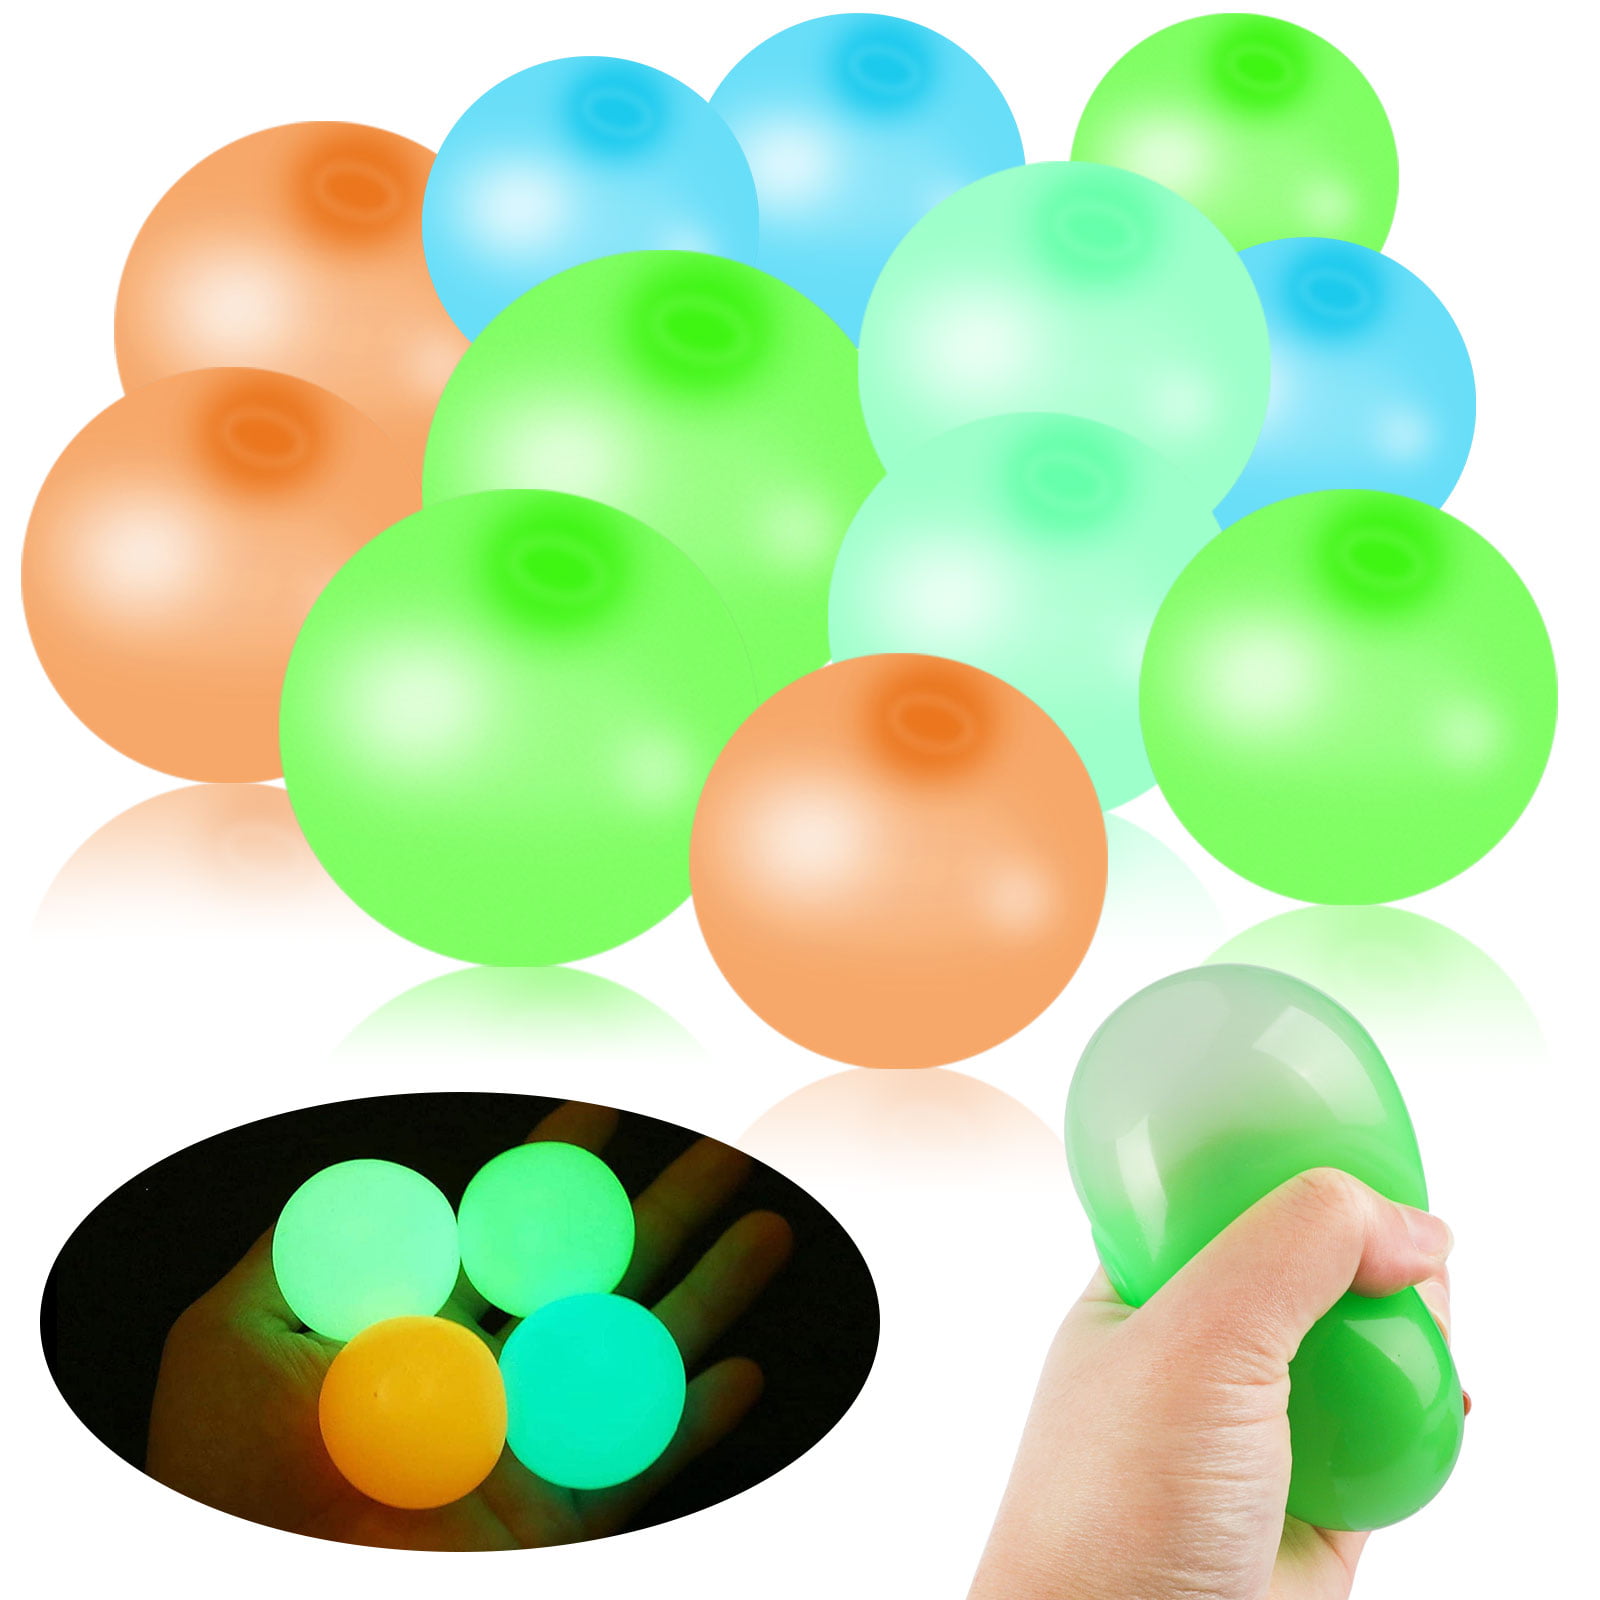 Details about   4X Sticky Wall Ball Balls Toy Kid Gift Relax Pressure Fluorescent Colorful Tool 